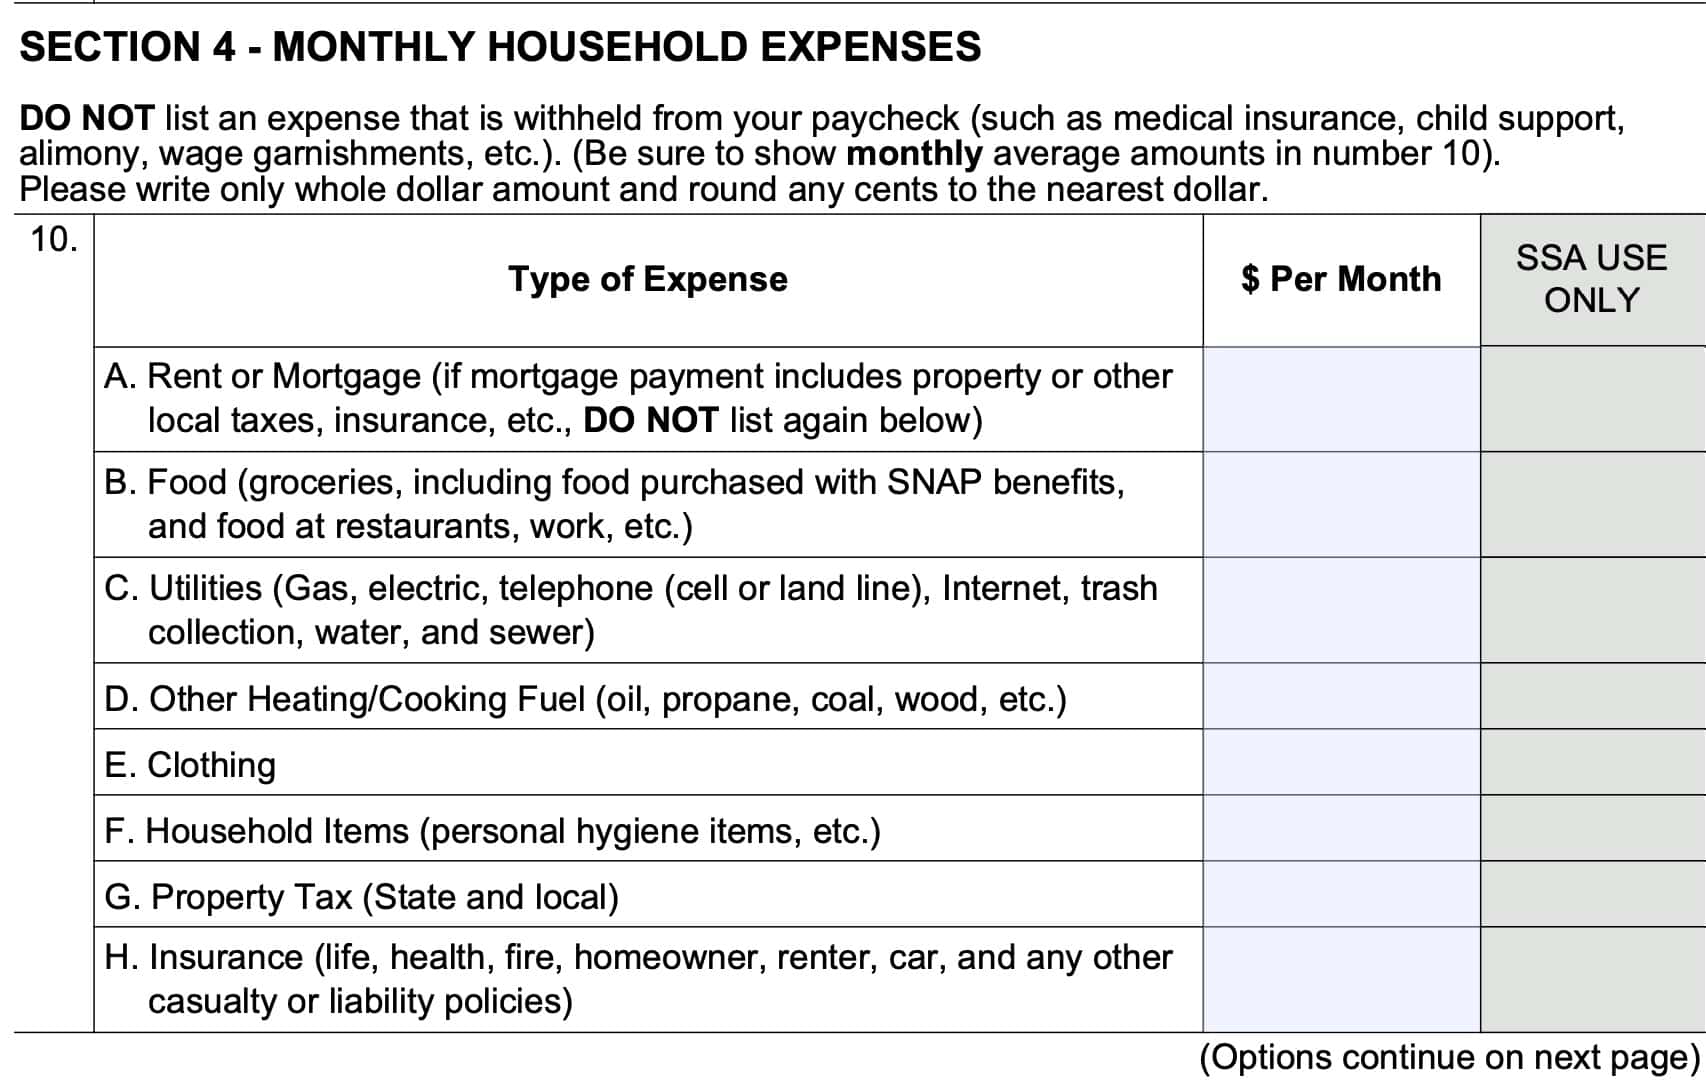 form ssa 634, section 4: monthly household expenses